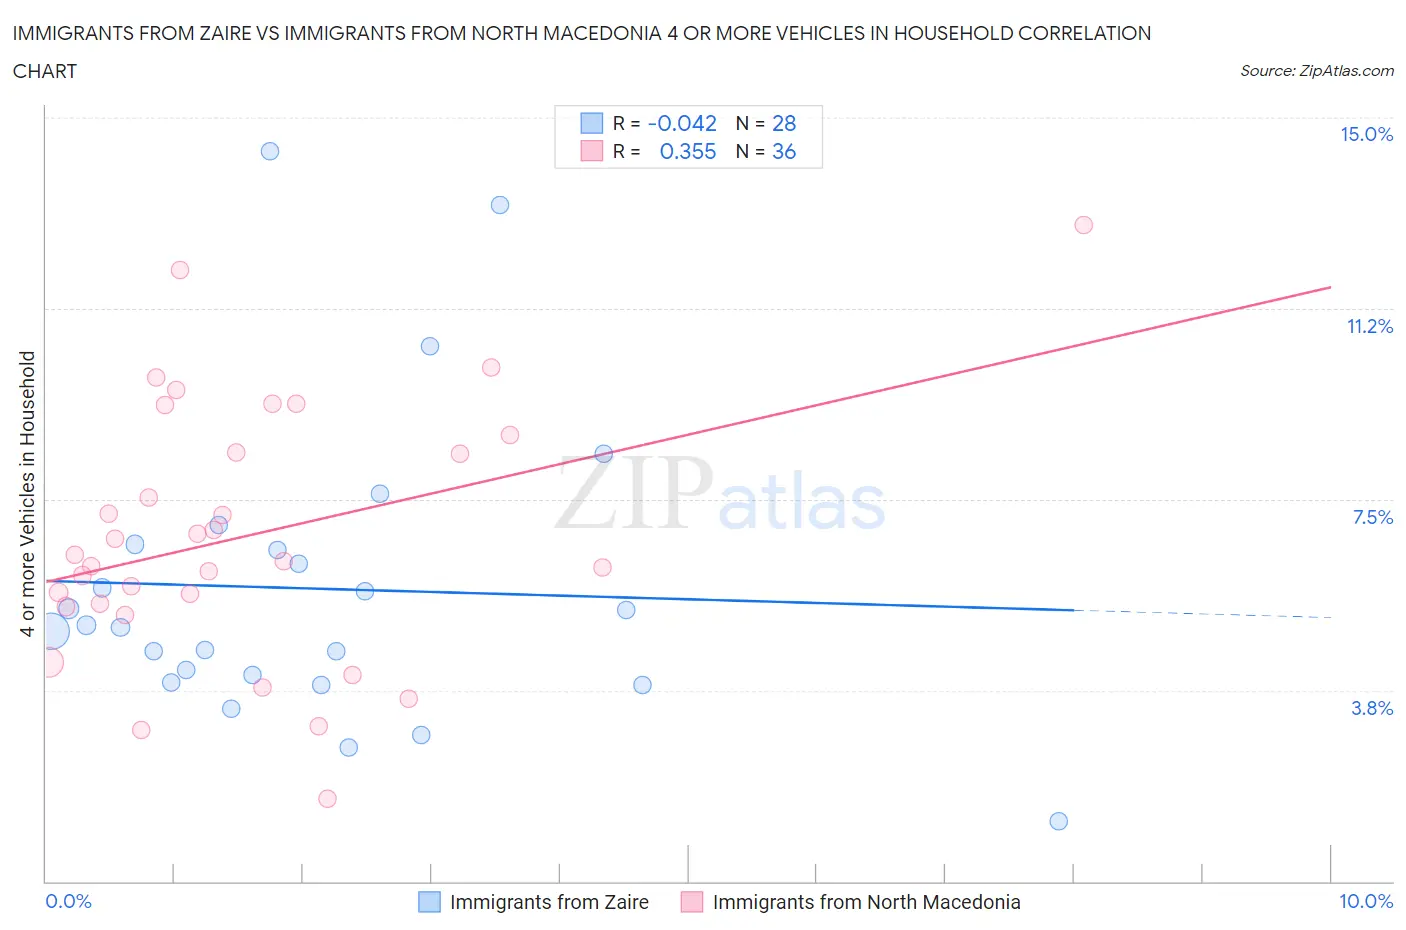 Immigrants from Zaire vs Immigrants from North Macedonia 4 or more Vehicles in Household